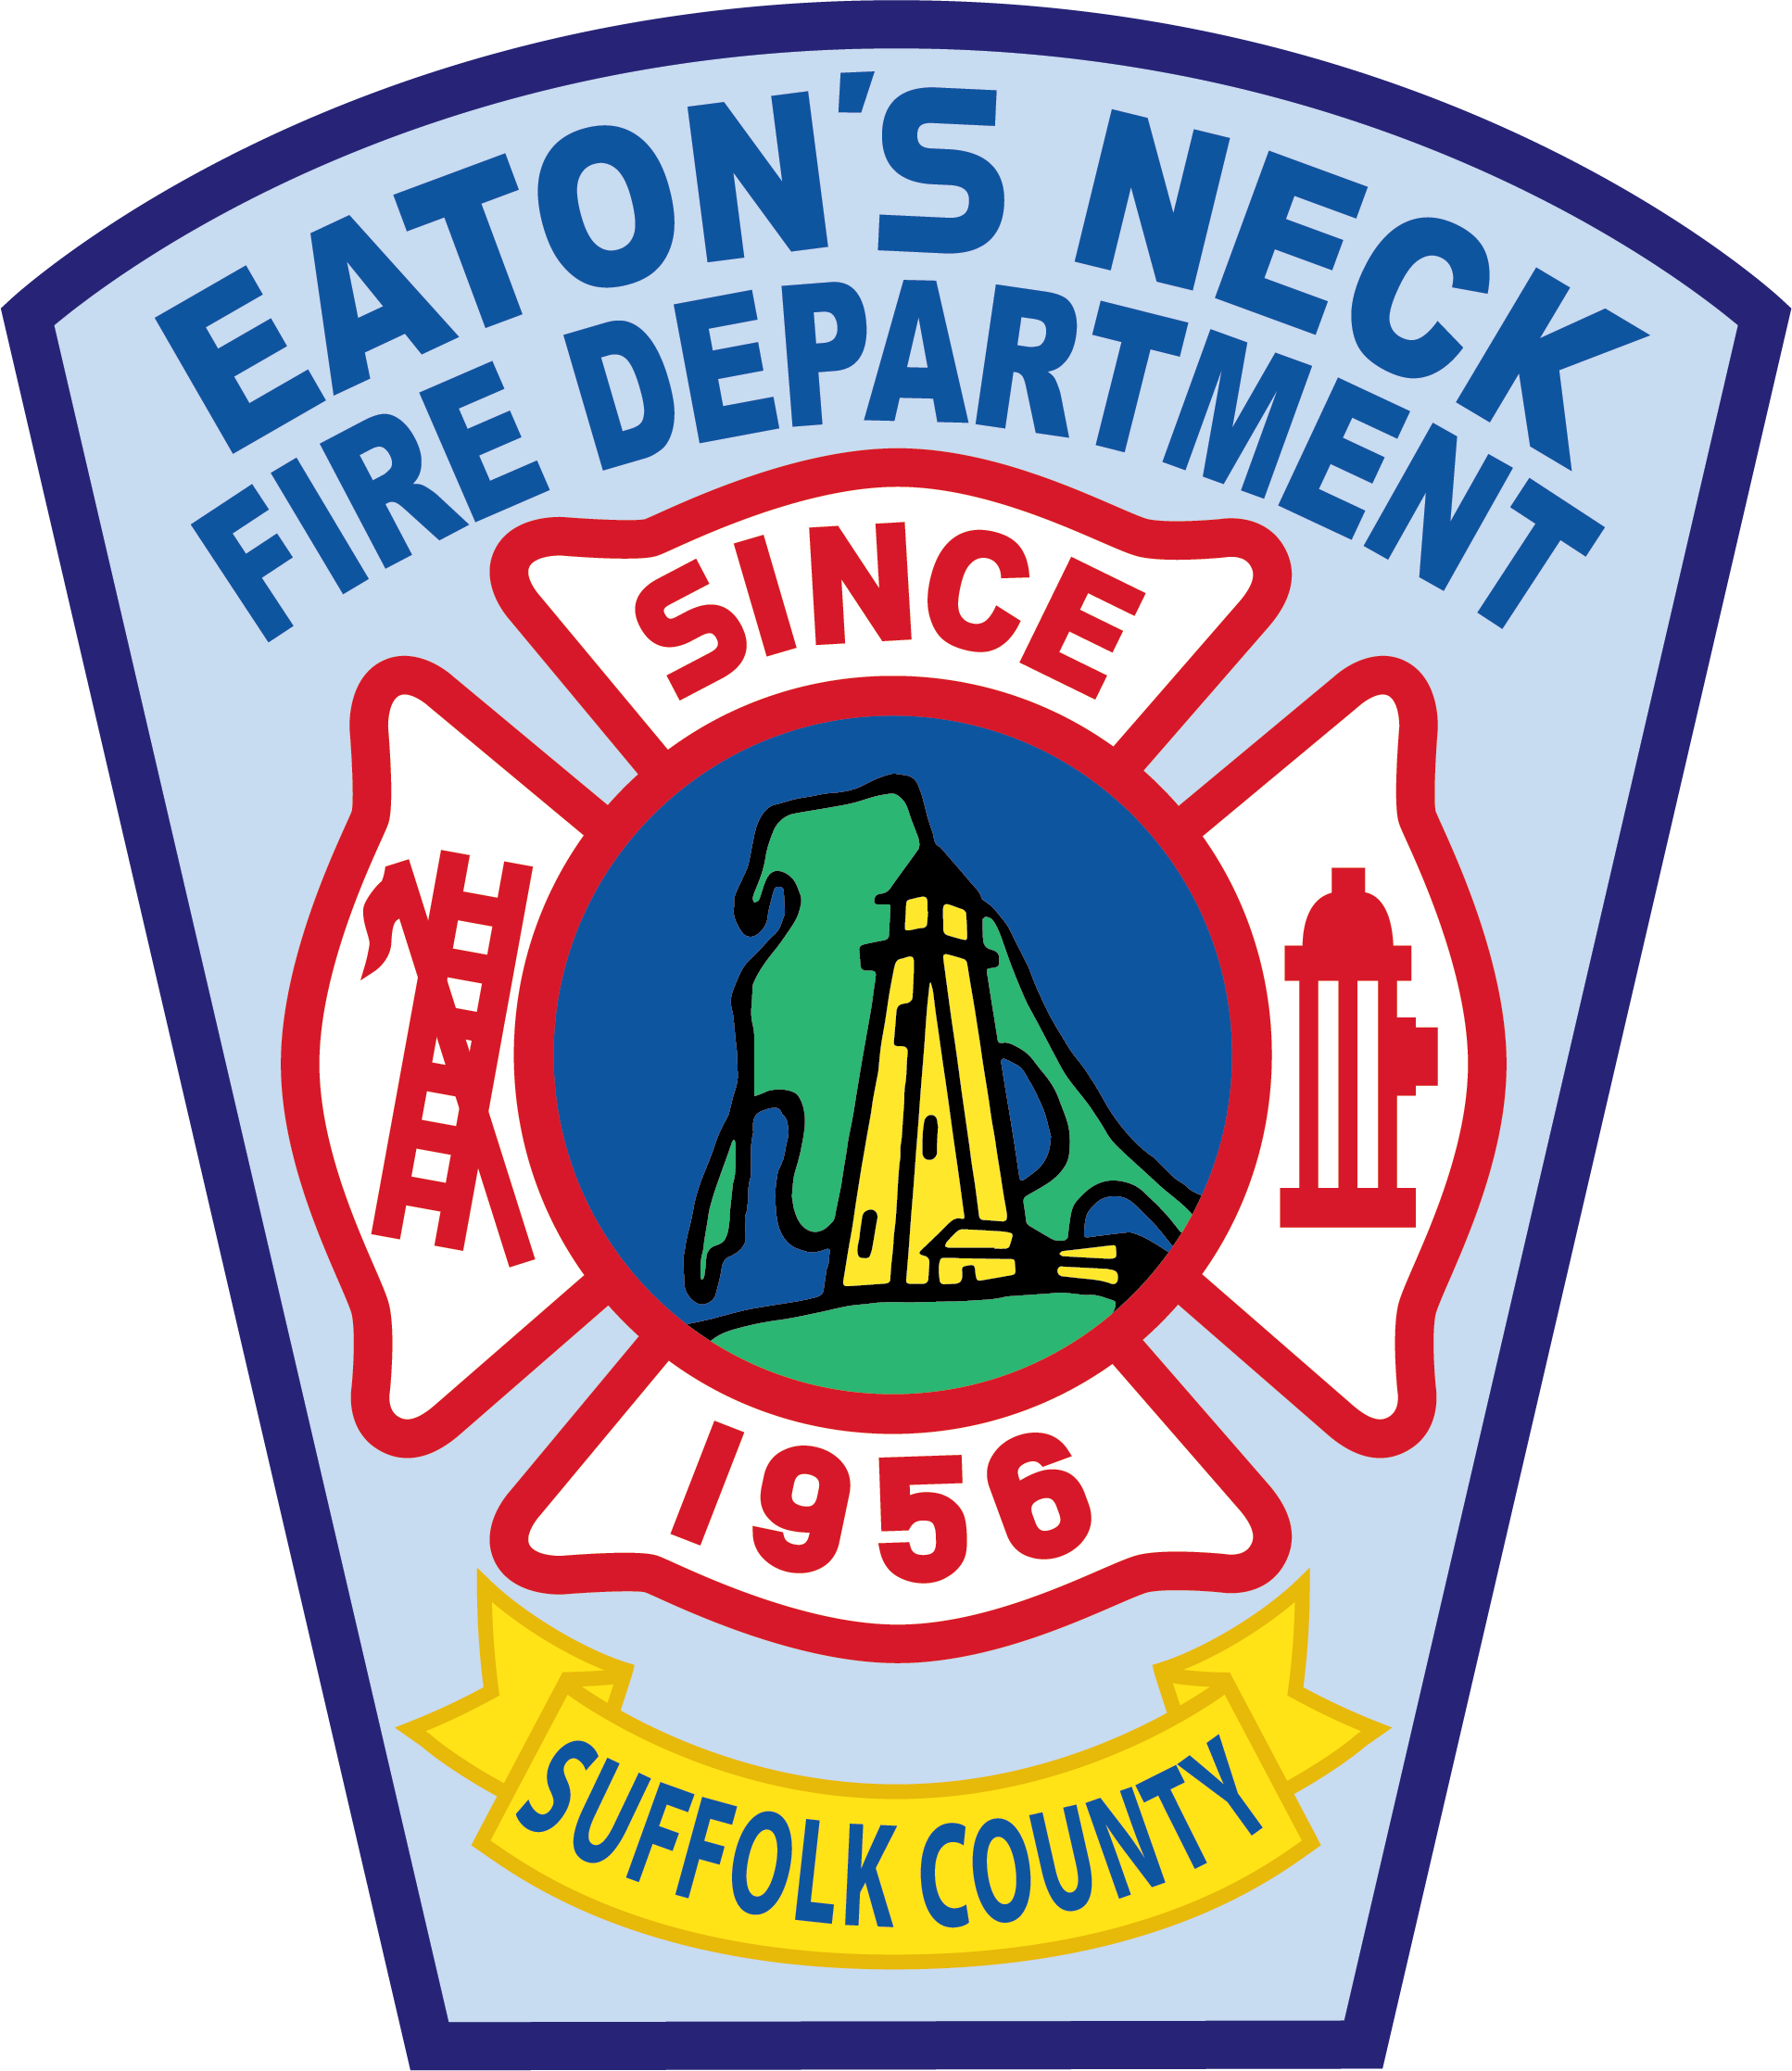 eaton-s-neck-fire-department-to-host-annual-children-s-christmas-party